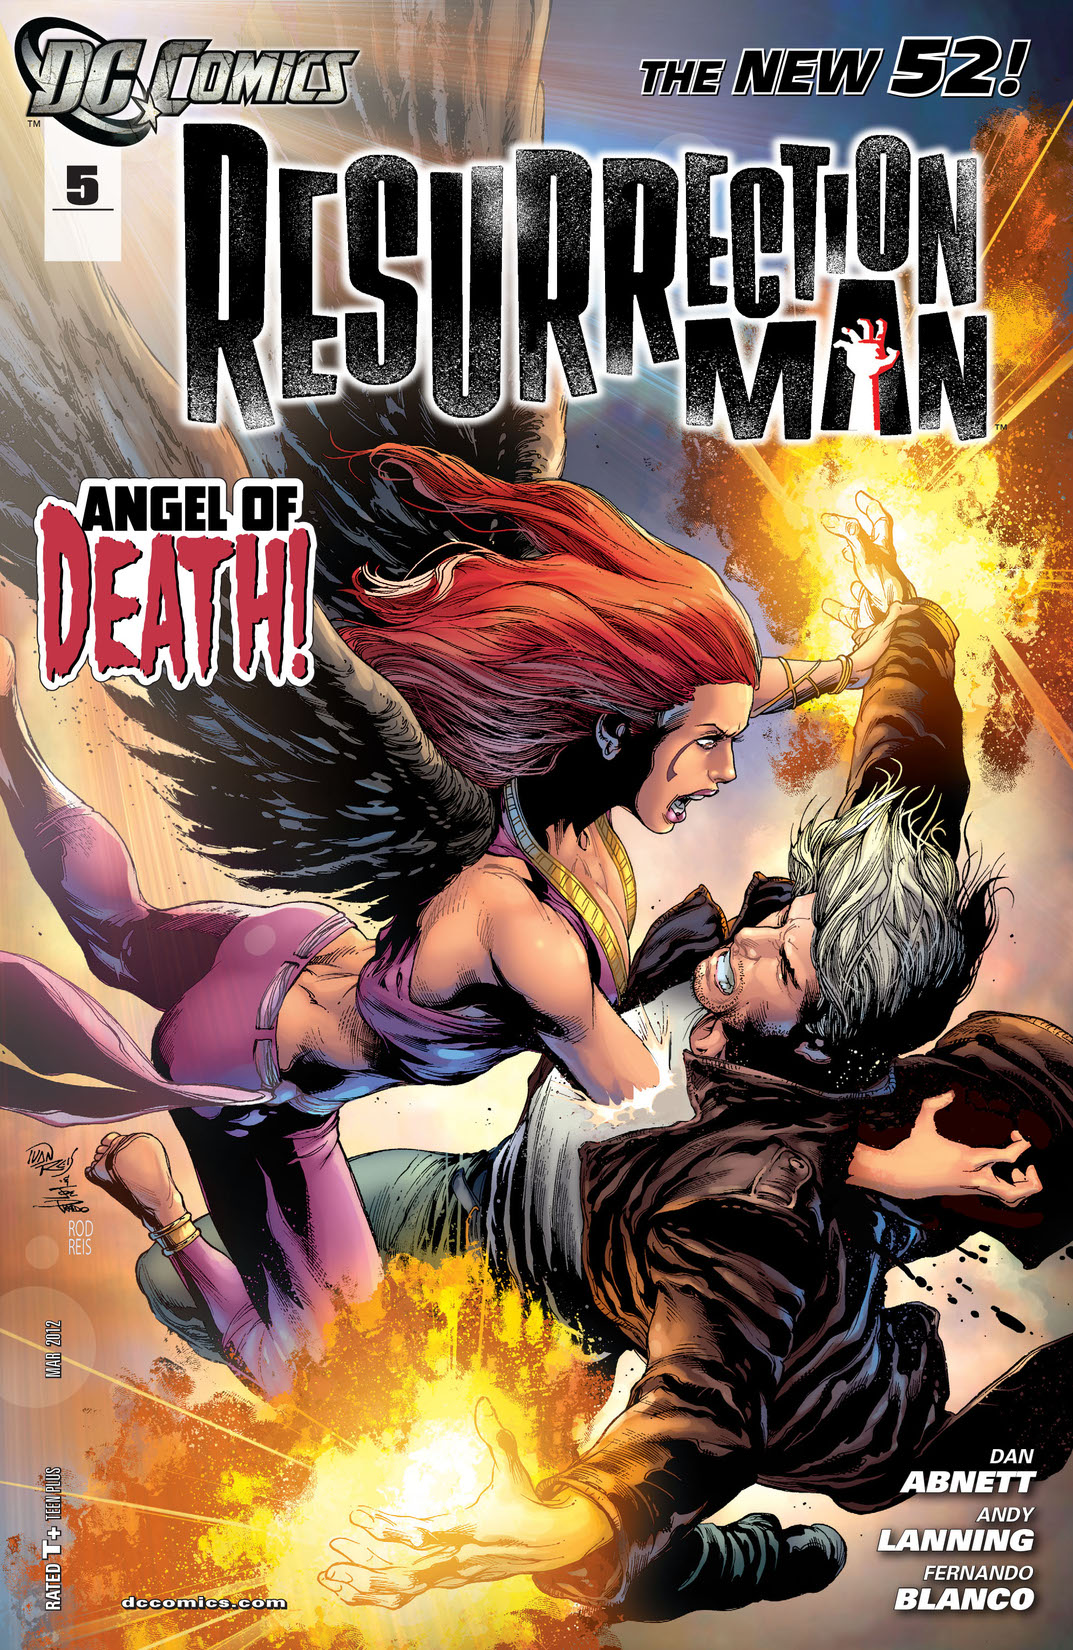 Resurrection Man (2011-) #5 preview images